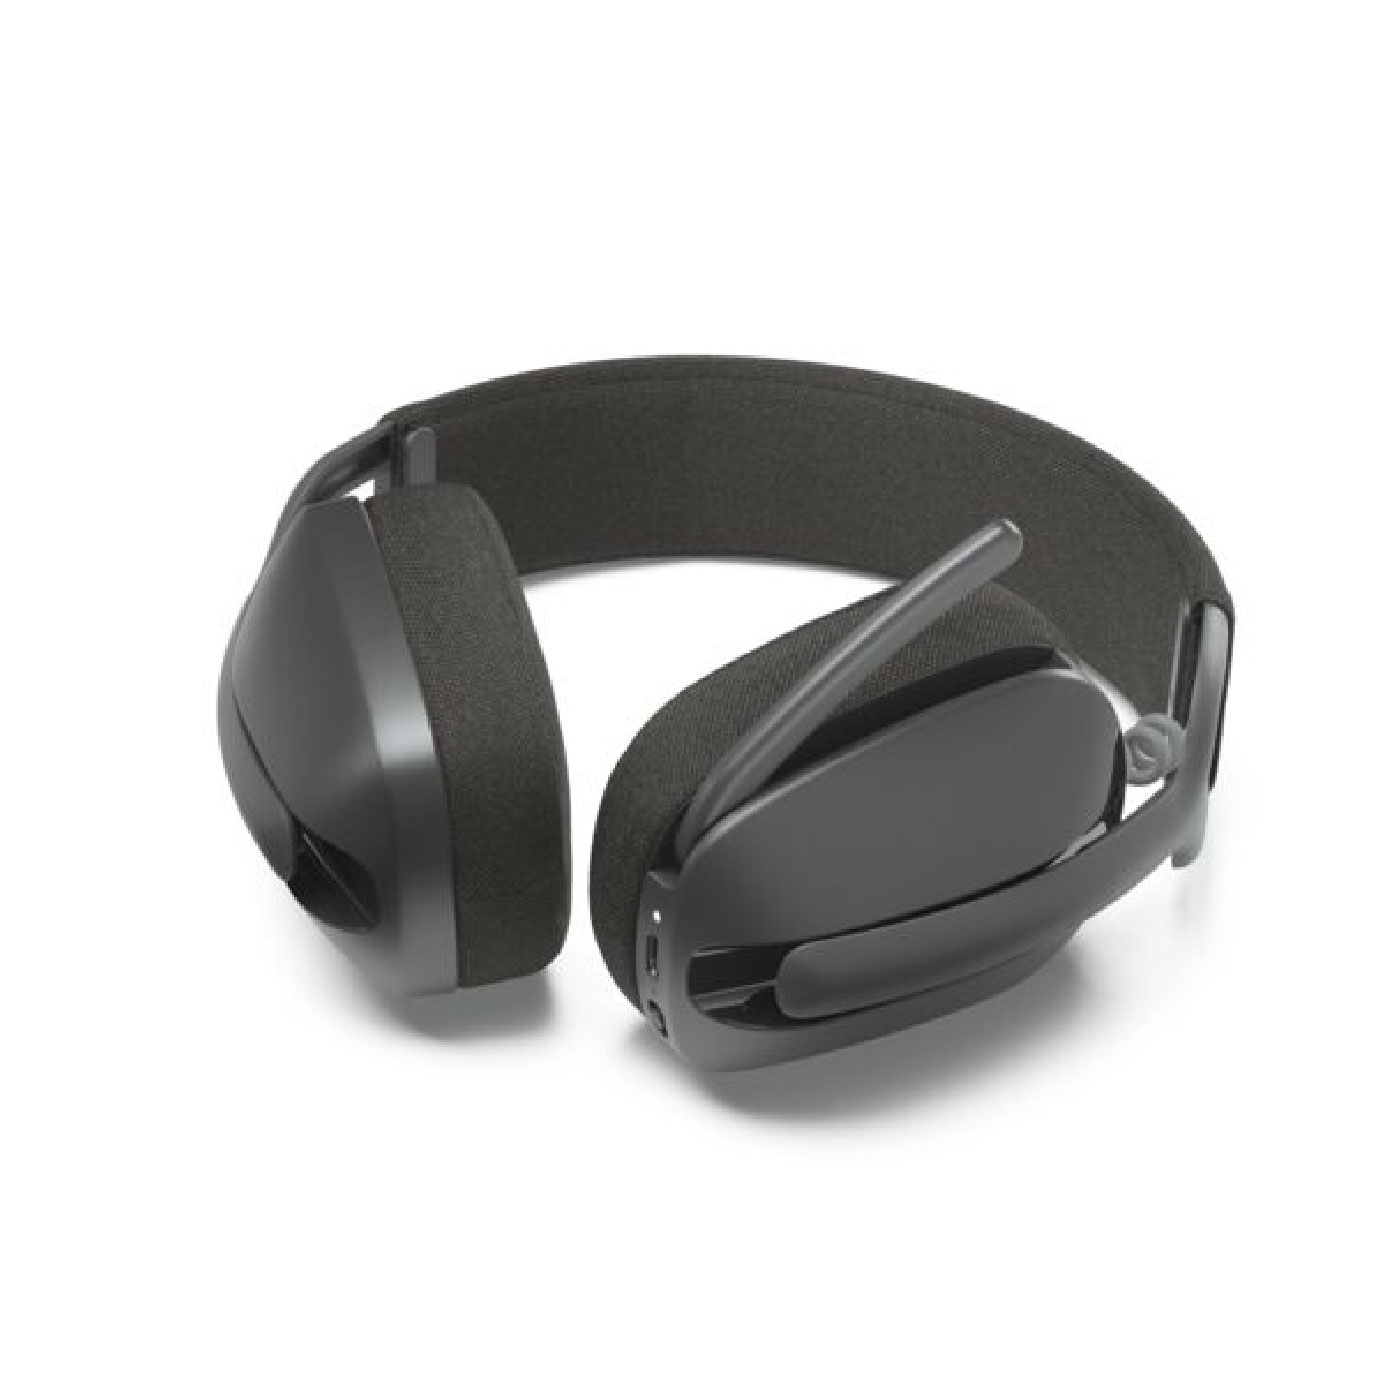 Logitech Zone Vibe 125 Wireless Headphones with Noise-Canceling Microphone, Bluetooth, USB-A Receiver; Works with Zoom, Google Voice/Meet, Mac/PC - Graphite 